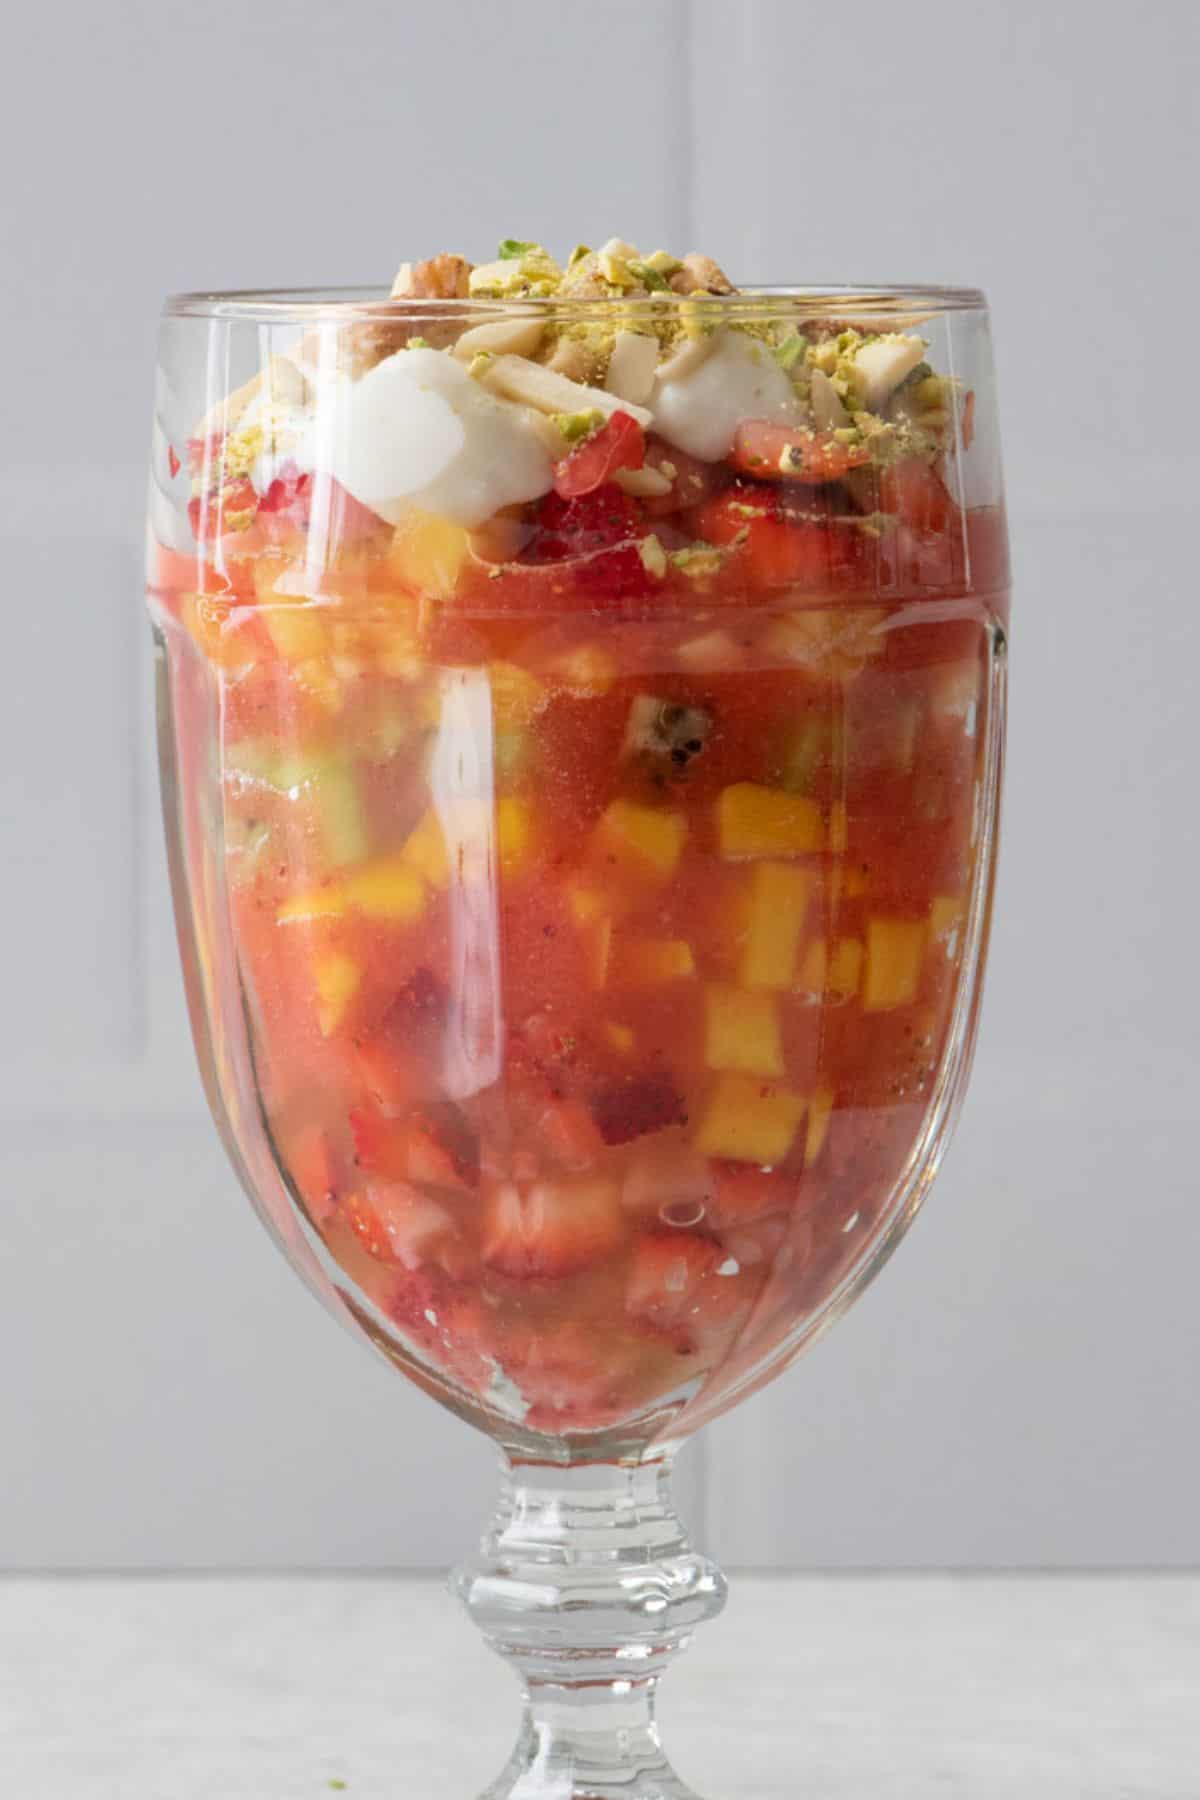 Close up of Fruit Cocktail to show the layers of fruit in juice and the ashta topping with nuts.